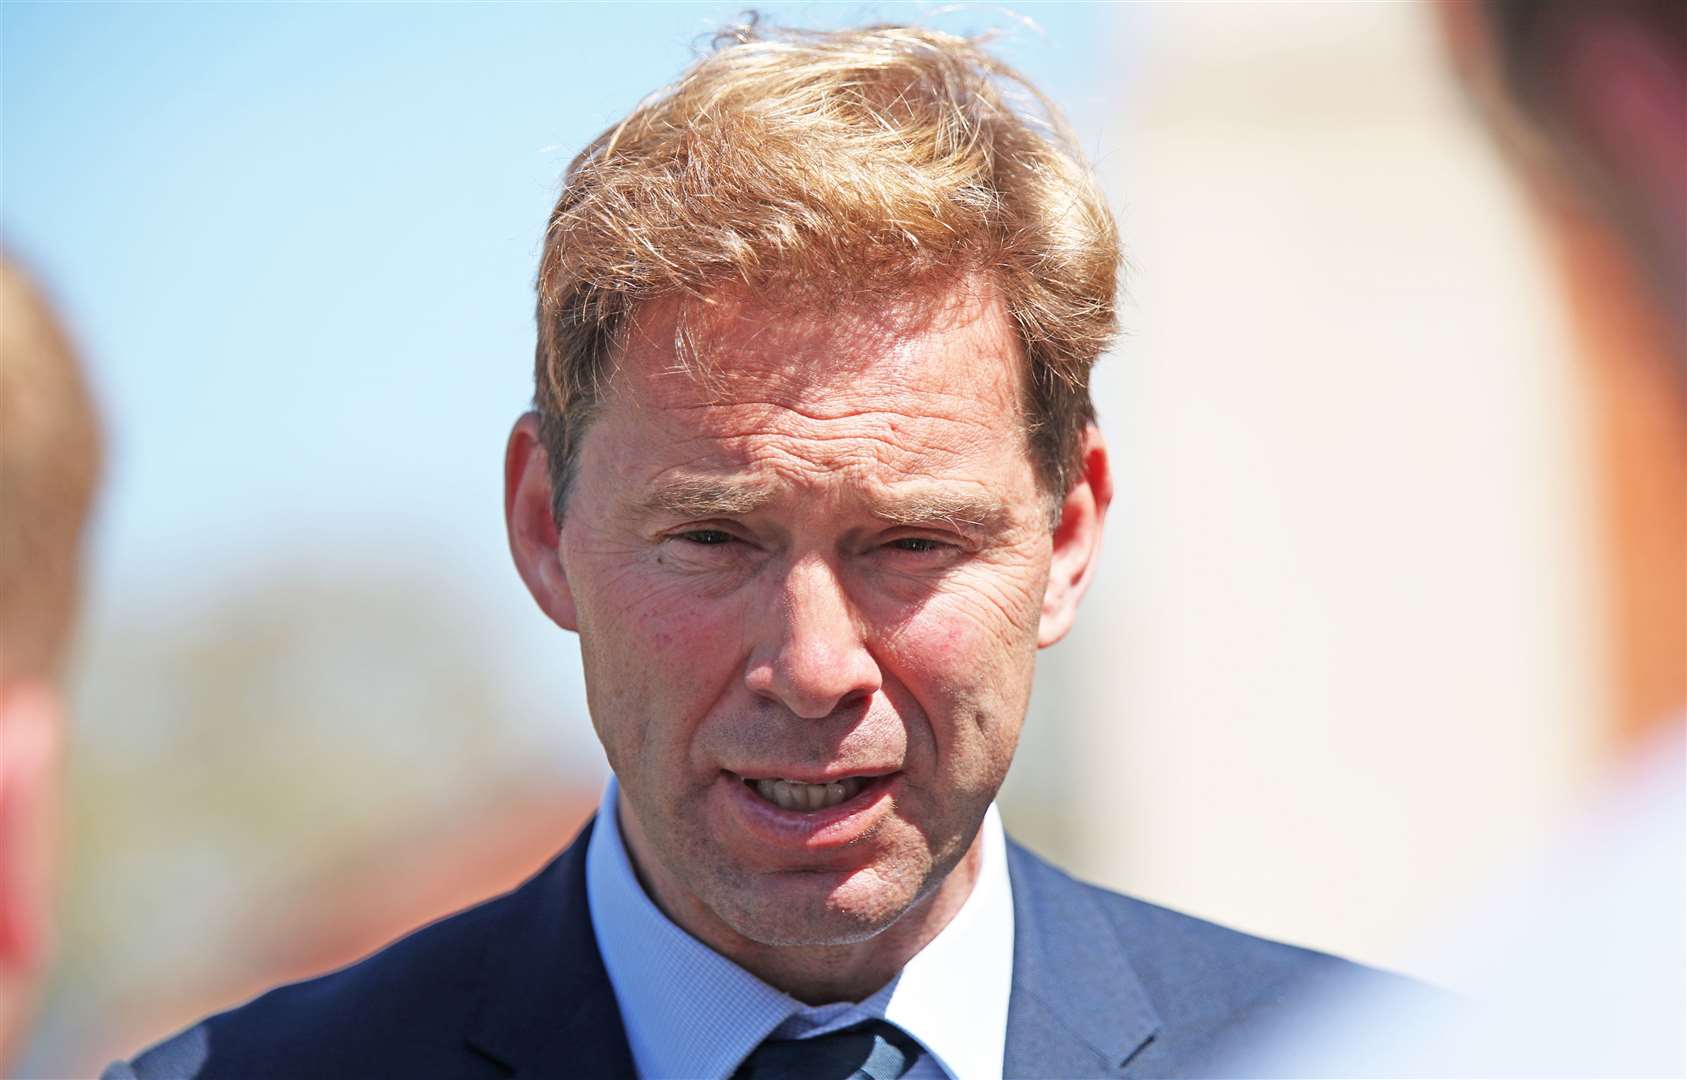 Former Tory minister Tobias Ellwood said he wants to see the findings of a review into the Greensill lobbying affair (Yui Mok/PA)